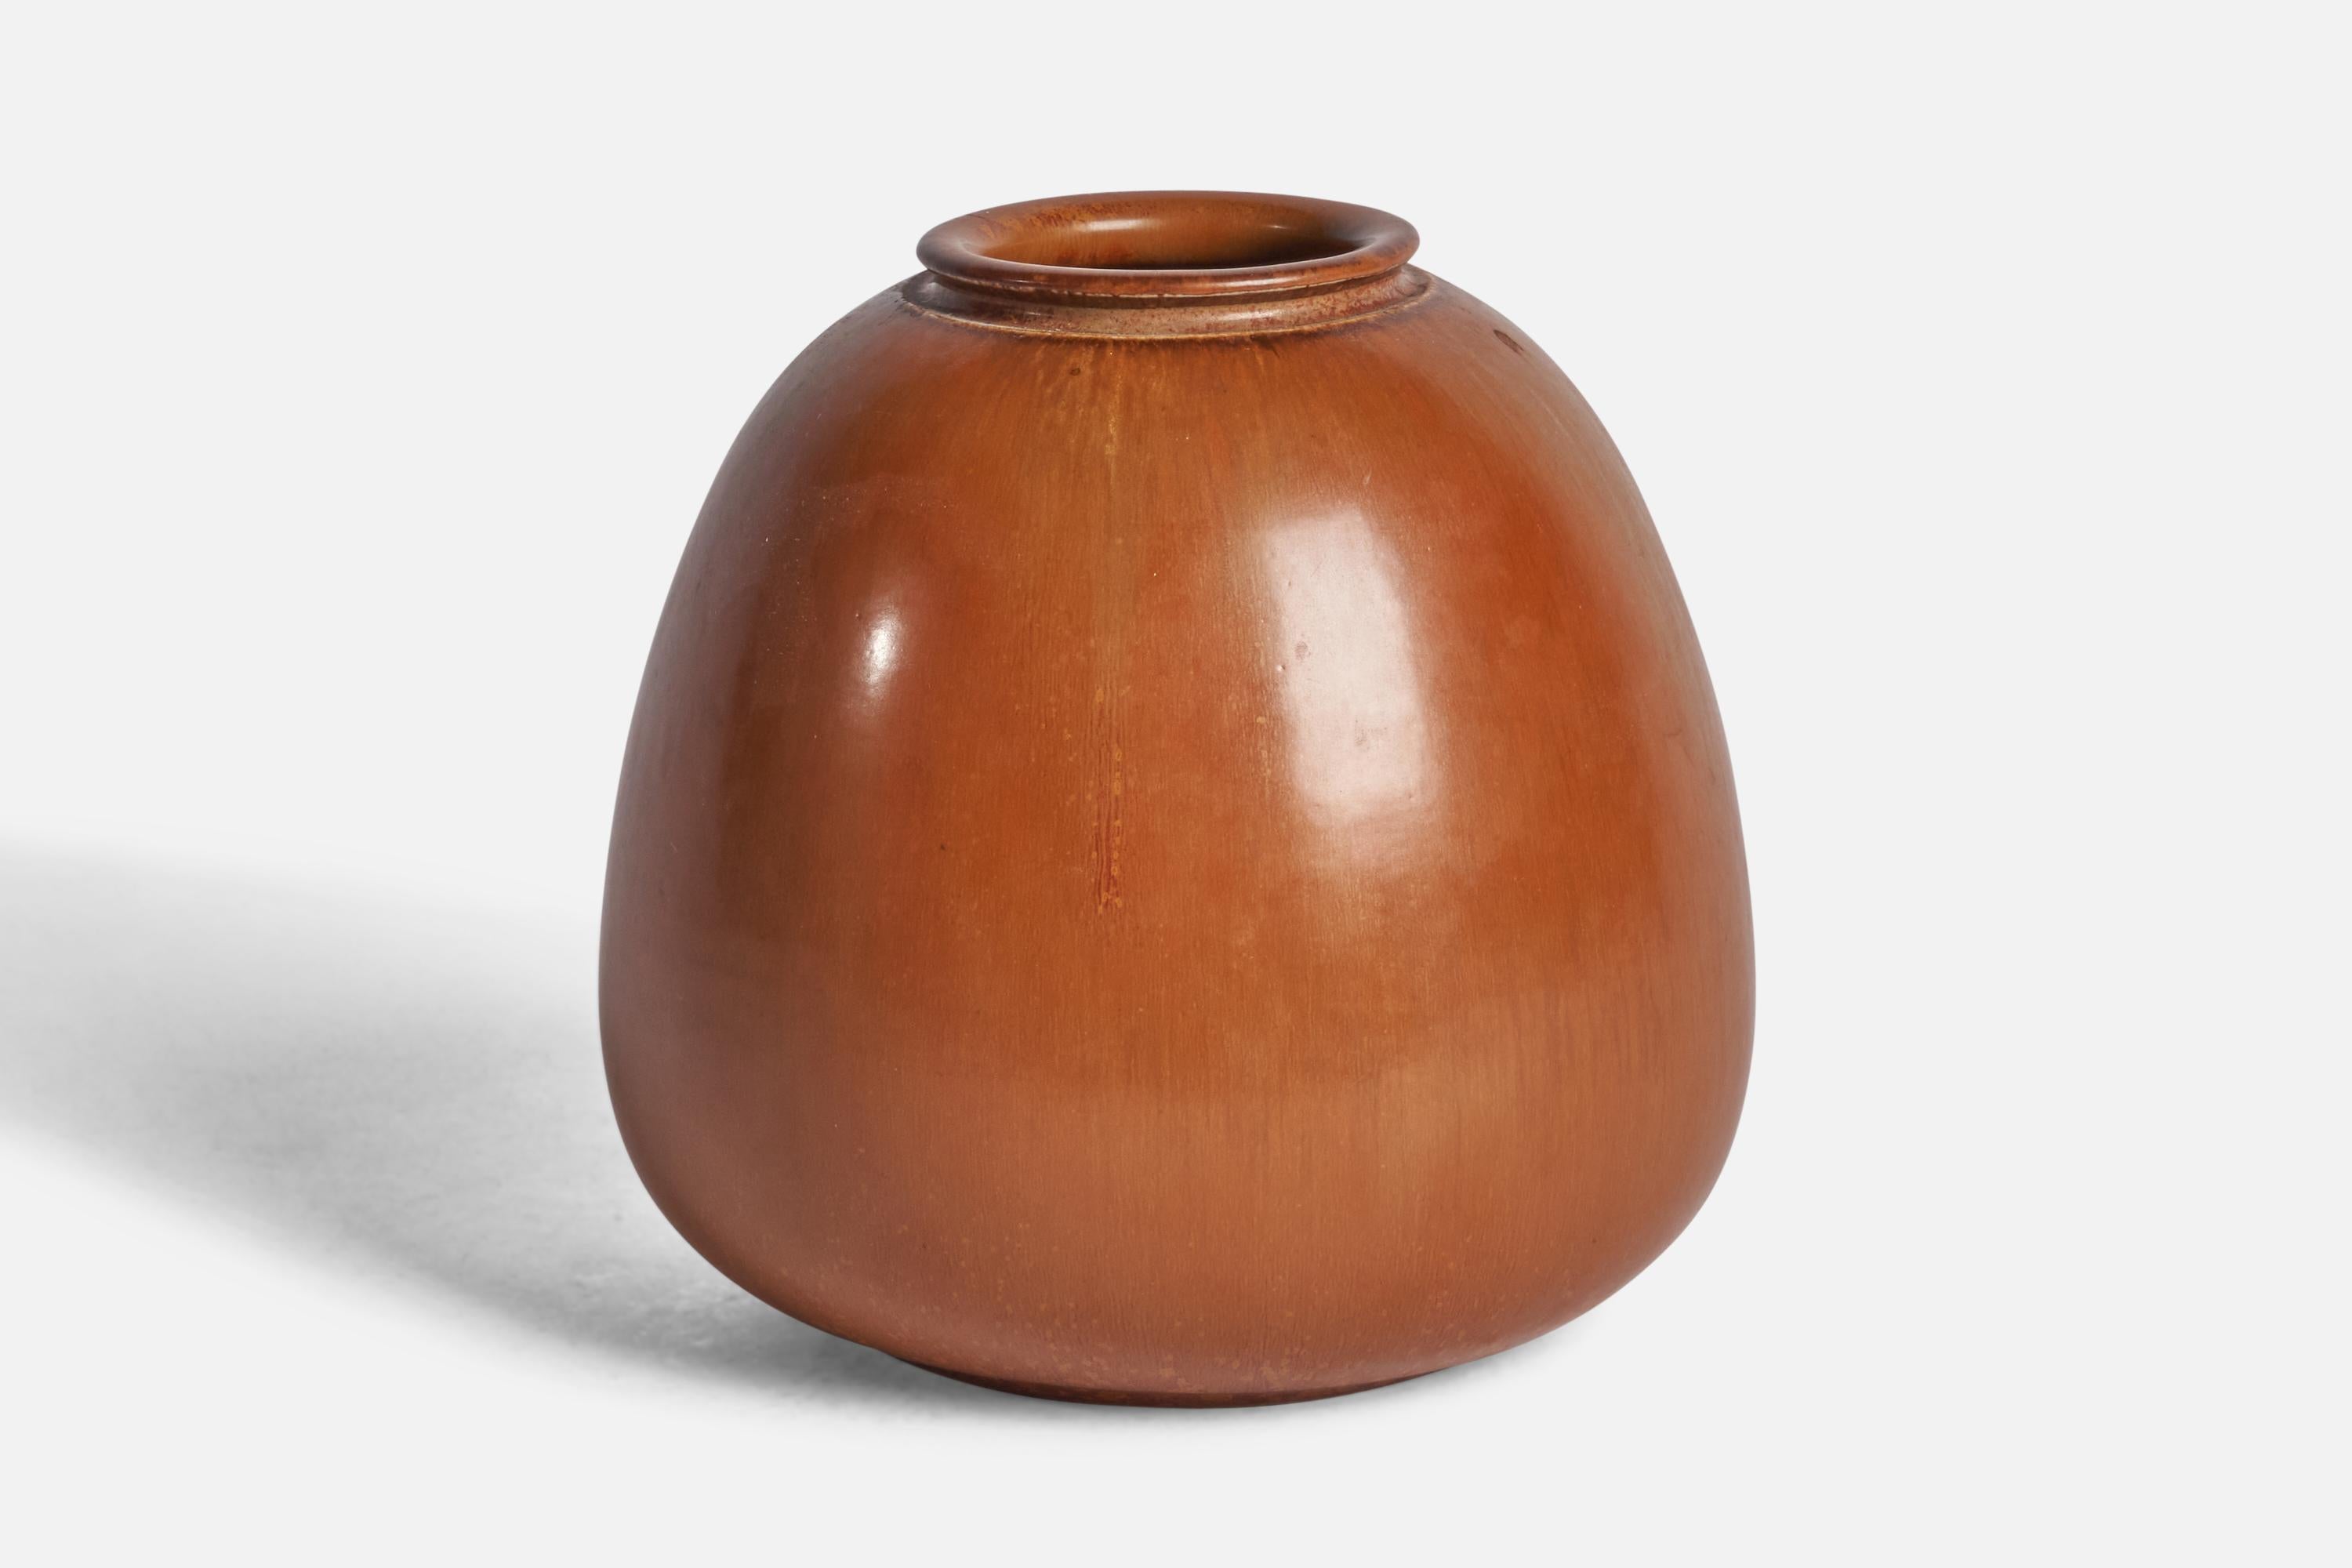 A brown-glazed stoneware vase designed by Eva Staehr-Nielsen and produced by Sax, Denmark, c. 1950s.

“SAXBO OANMART 14” on bottom